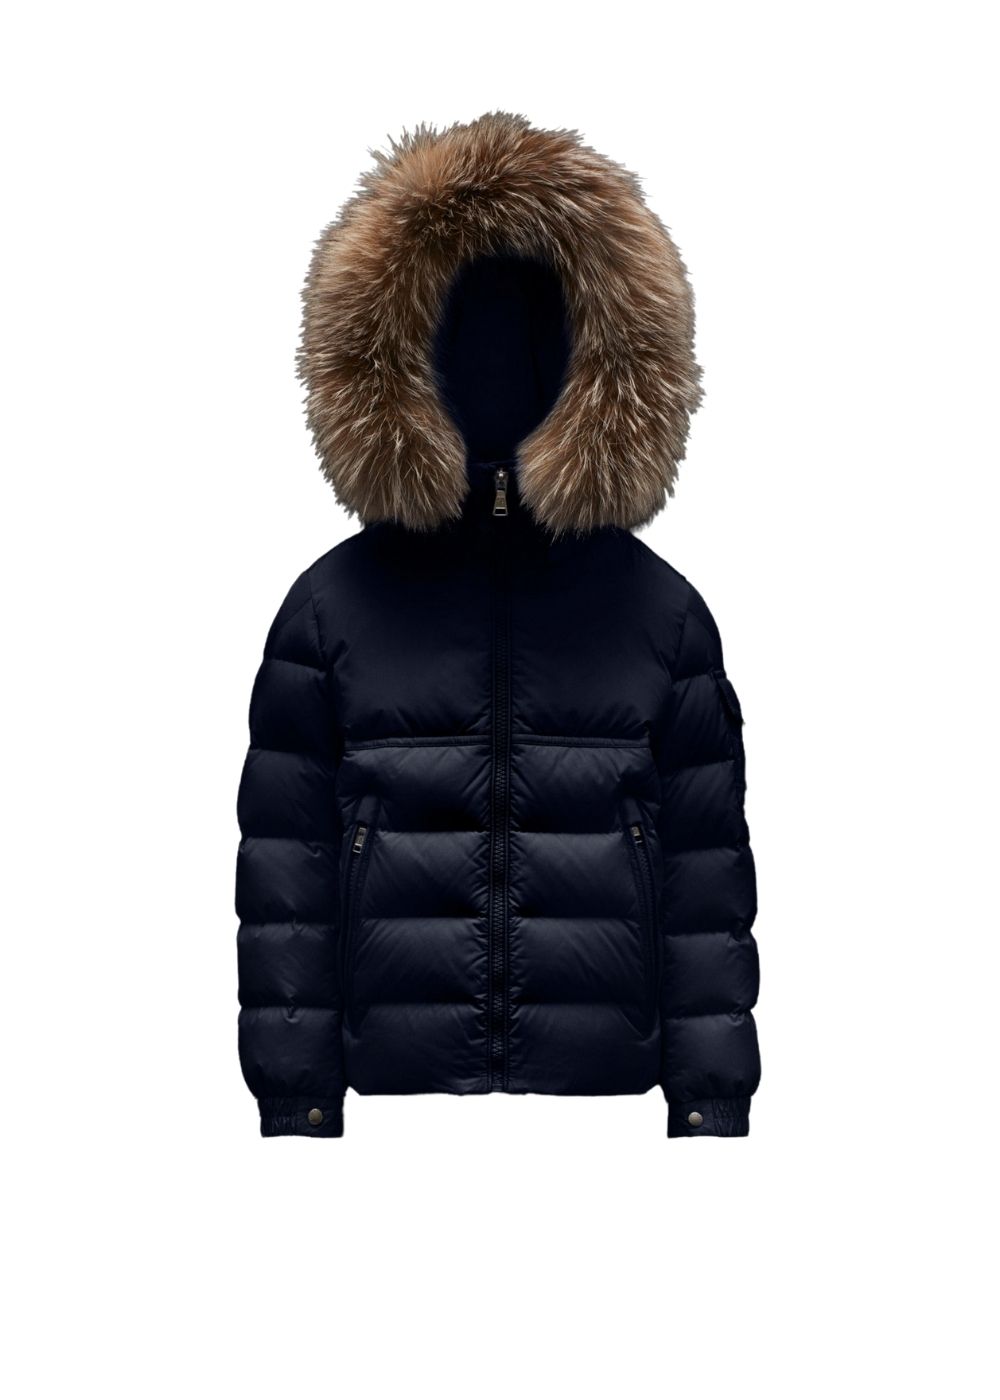 Featured image for “MONCLER NEW BYRON”